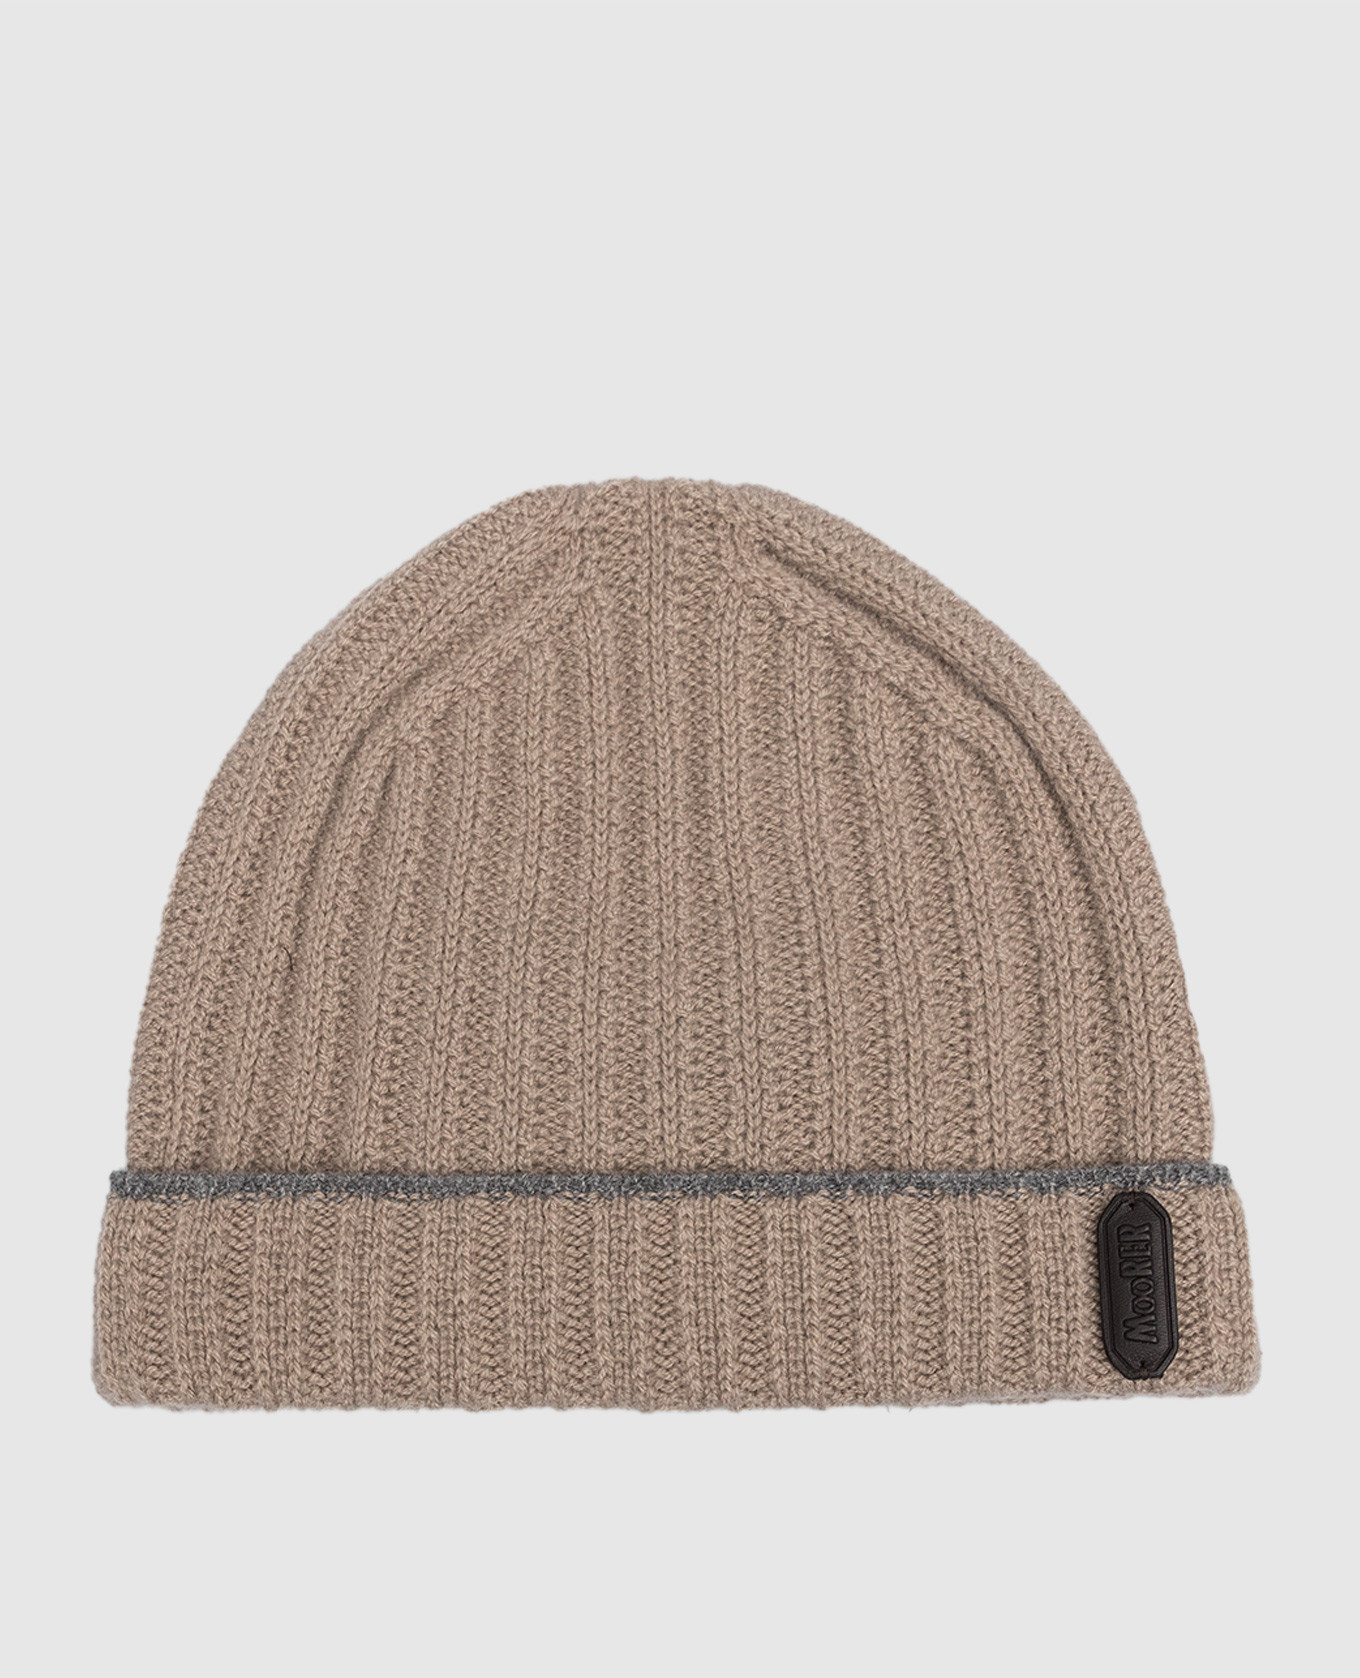 ASHER brown cashmere hat